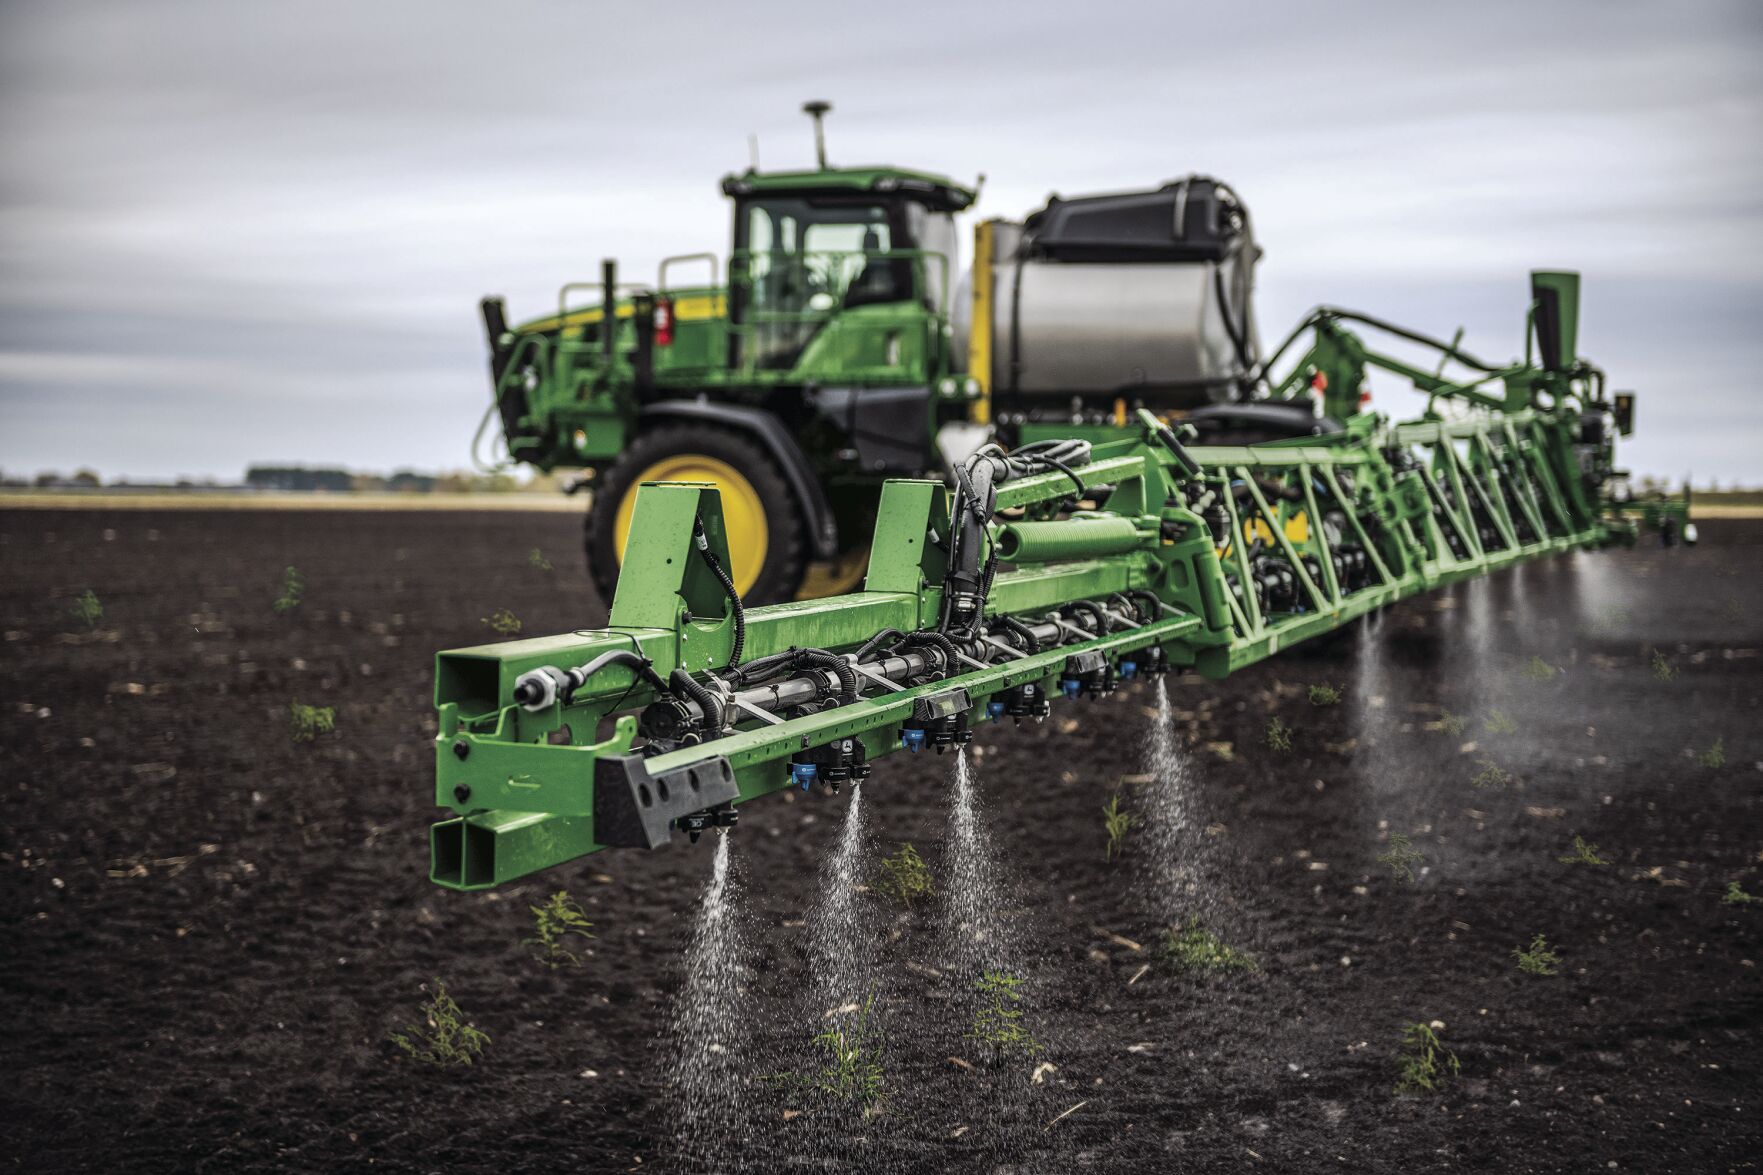 See & Spray Select can help farmers reduce their herbicide use by 77% on average by targeting and spraying only weeds on fallow ground. (Courtesy photo.)